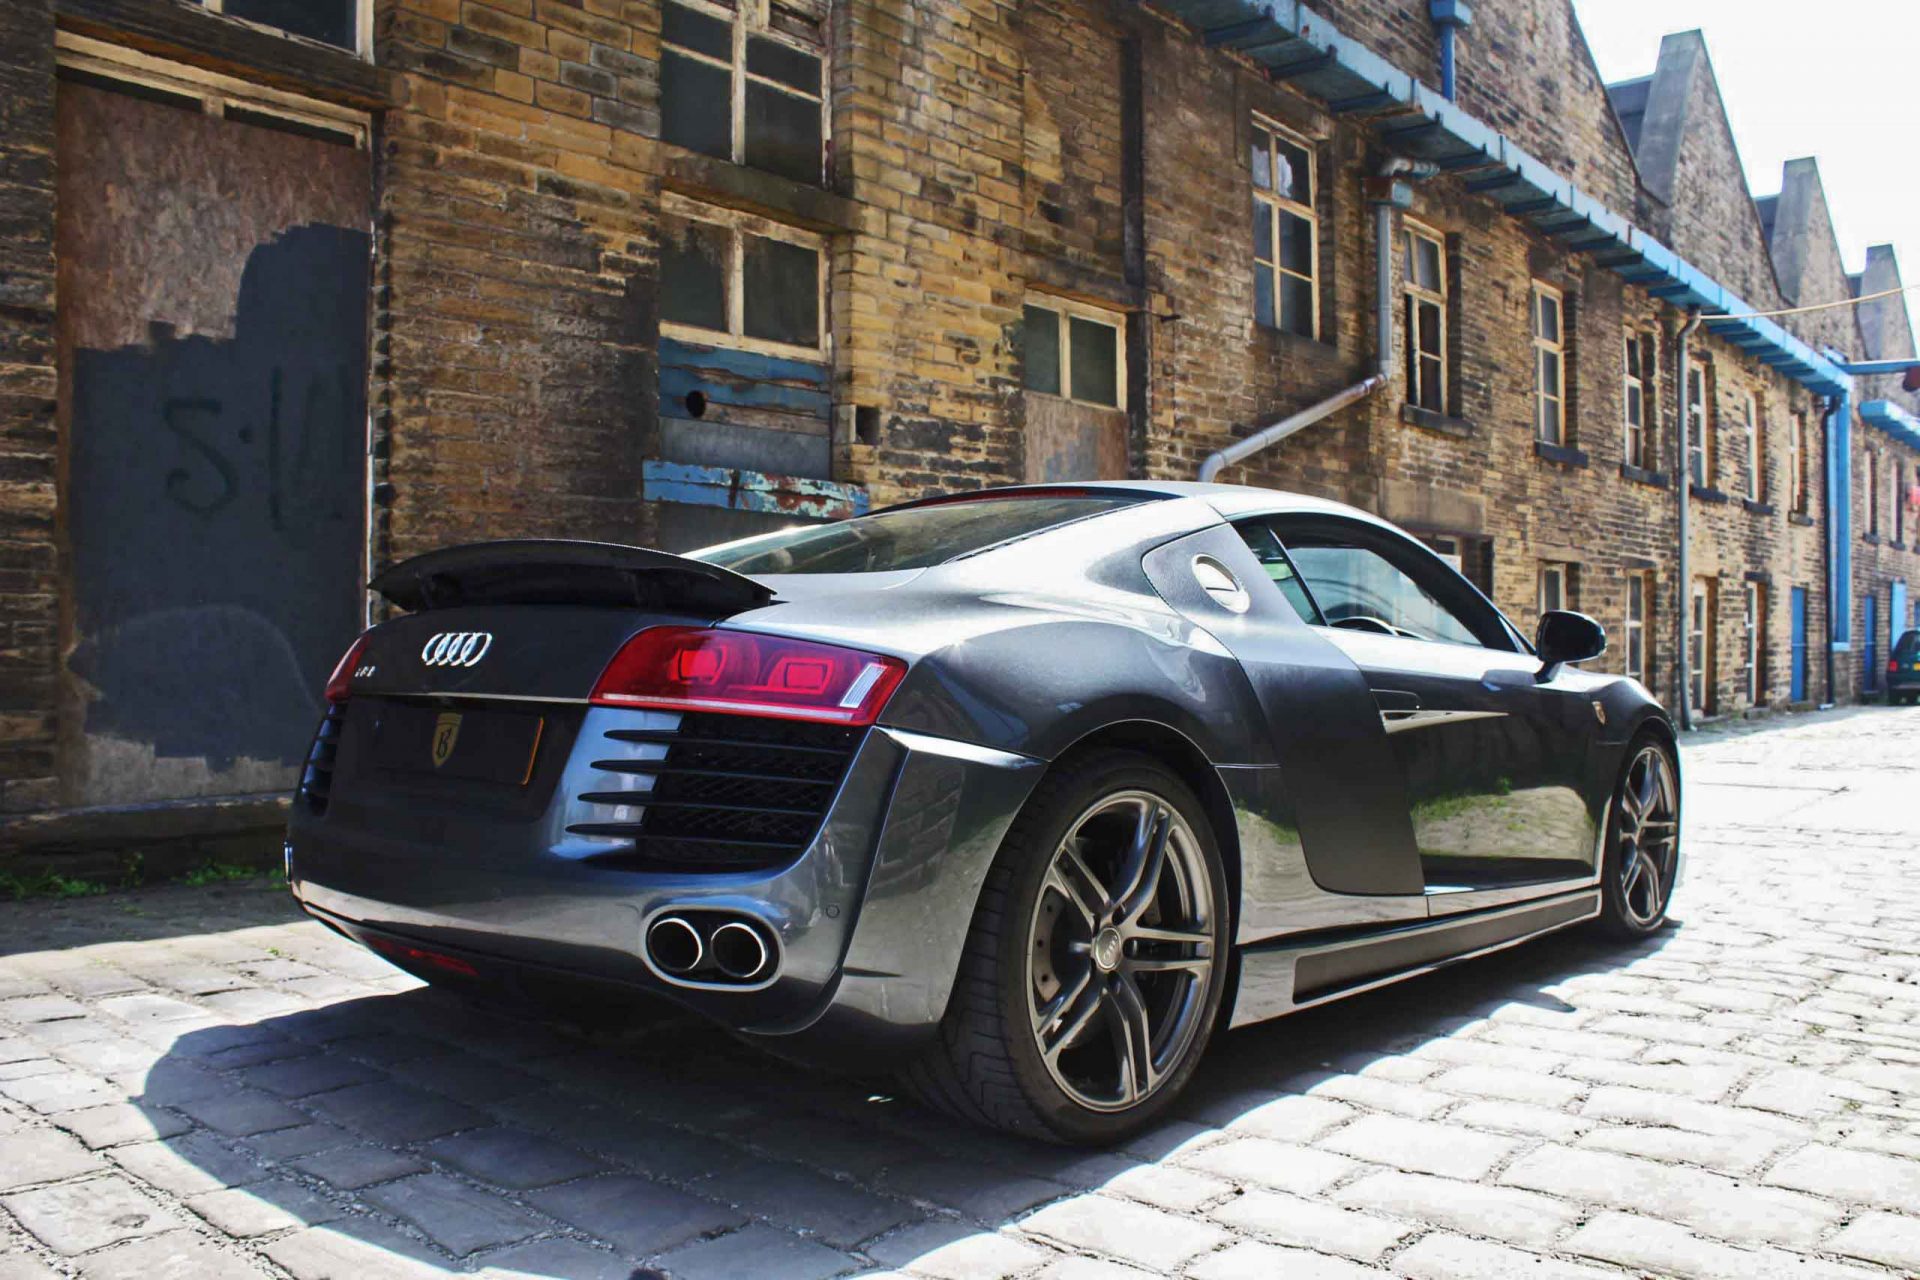 Check our price and buy Barugzai body kit for Audi R8 42!